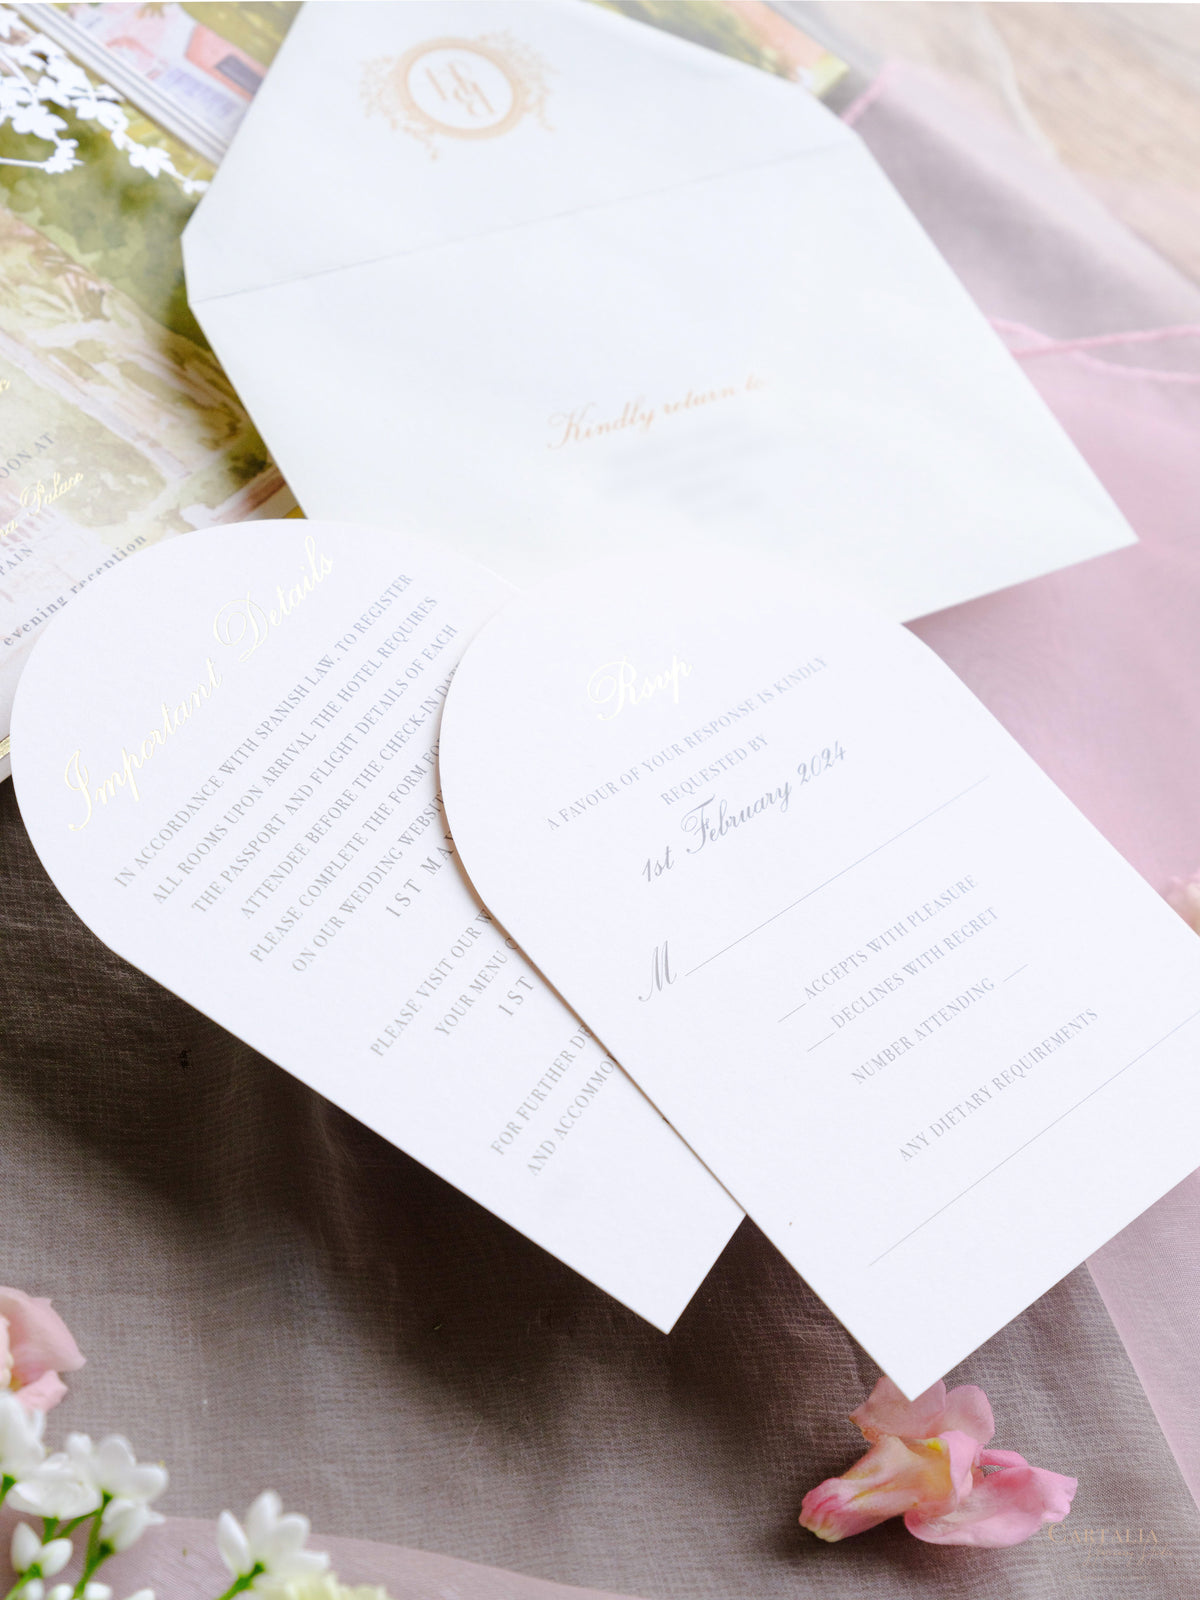 Luxury Wedding Invitation Suite with Watercolour Venue and Gold Foil | Villa Padierna Palace Marbella | Bespoke Commission for B&H